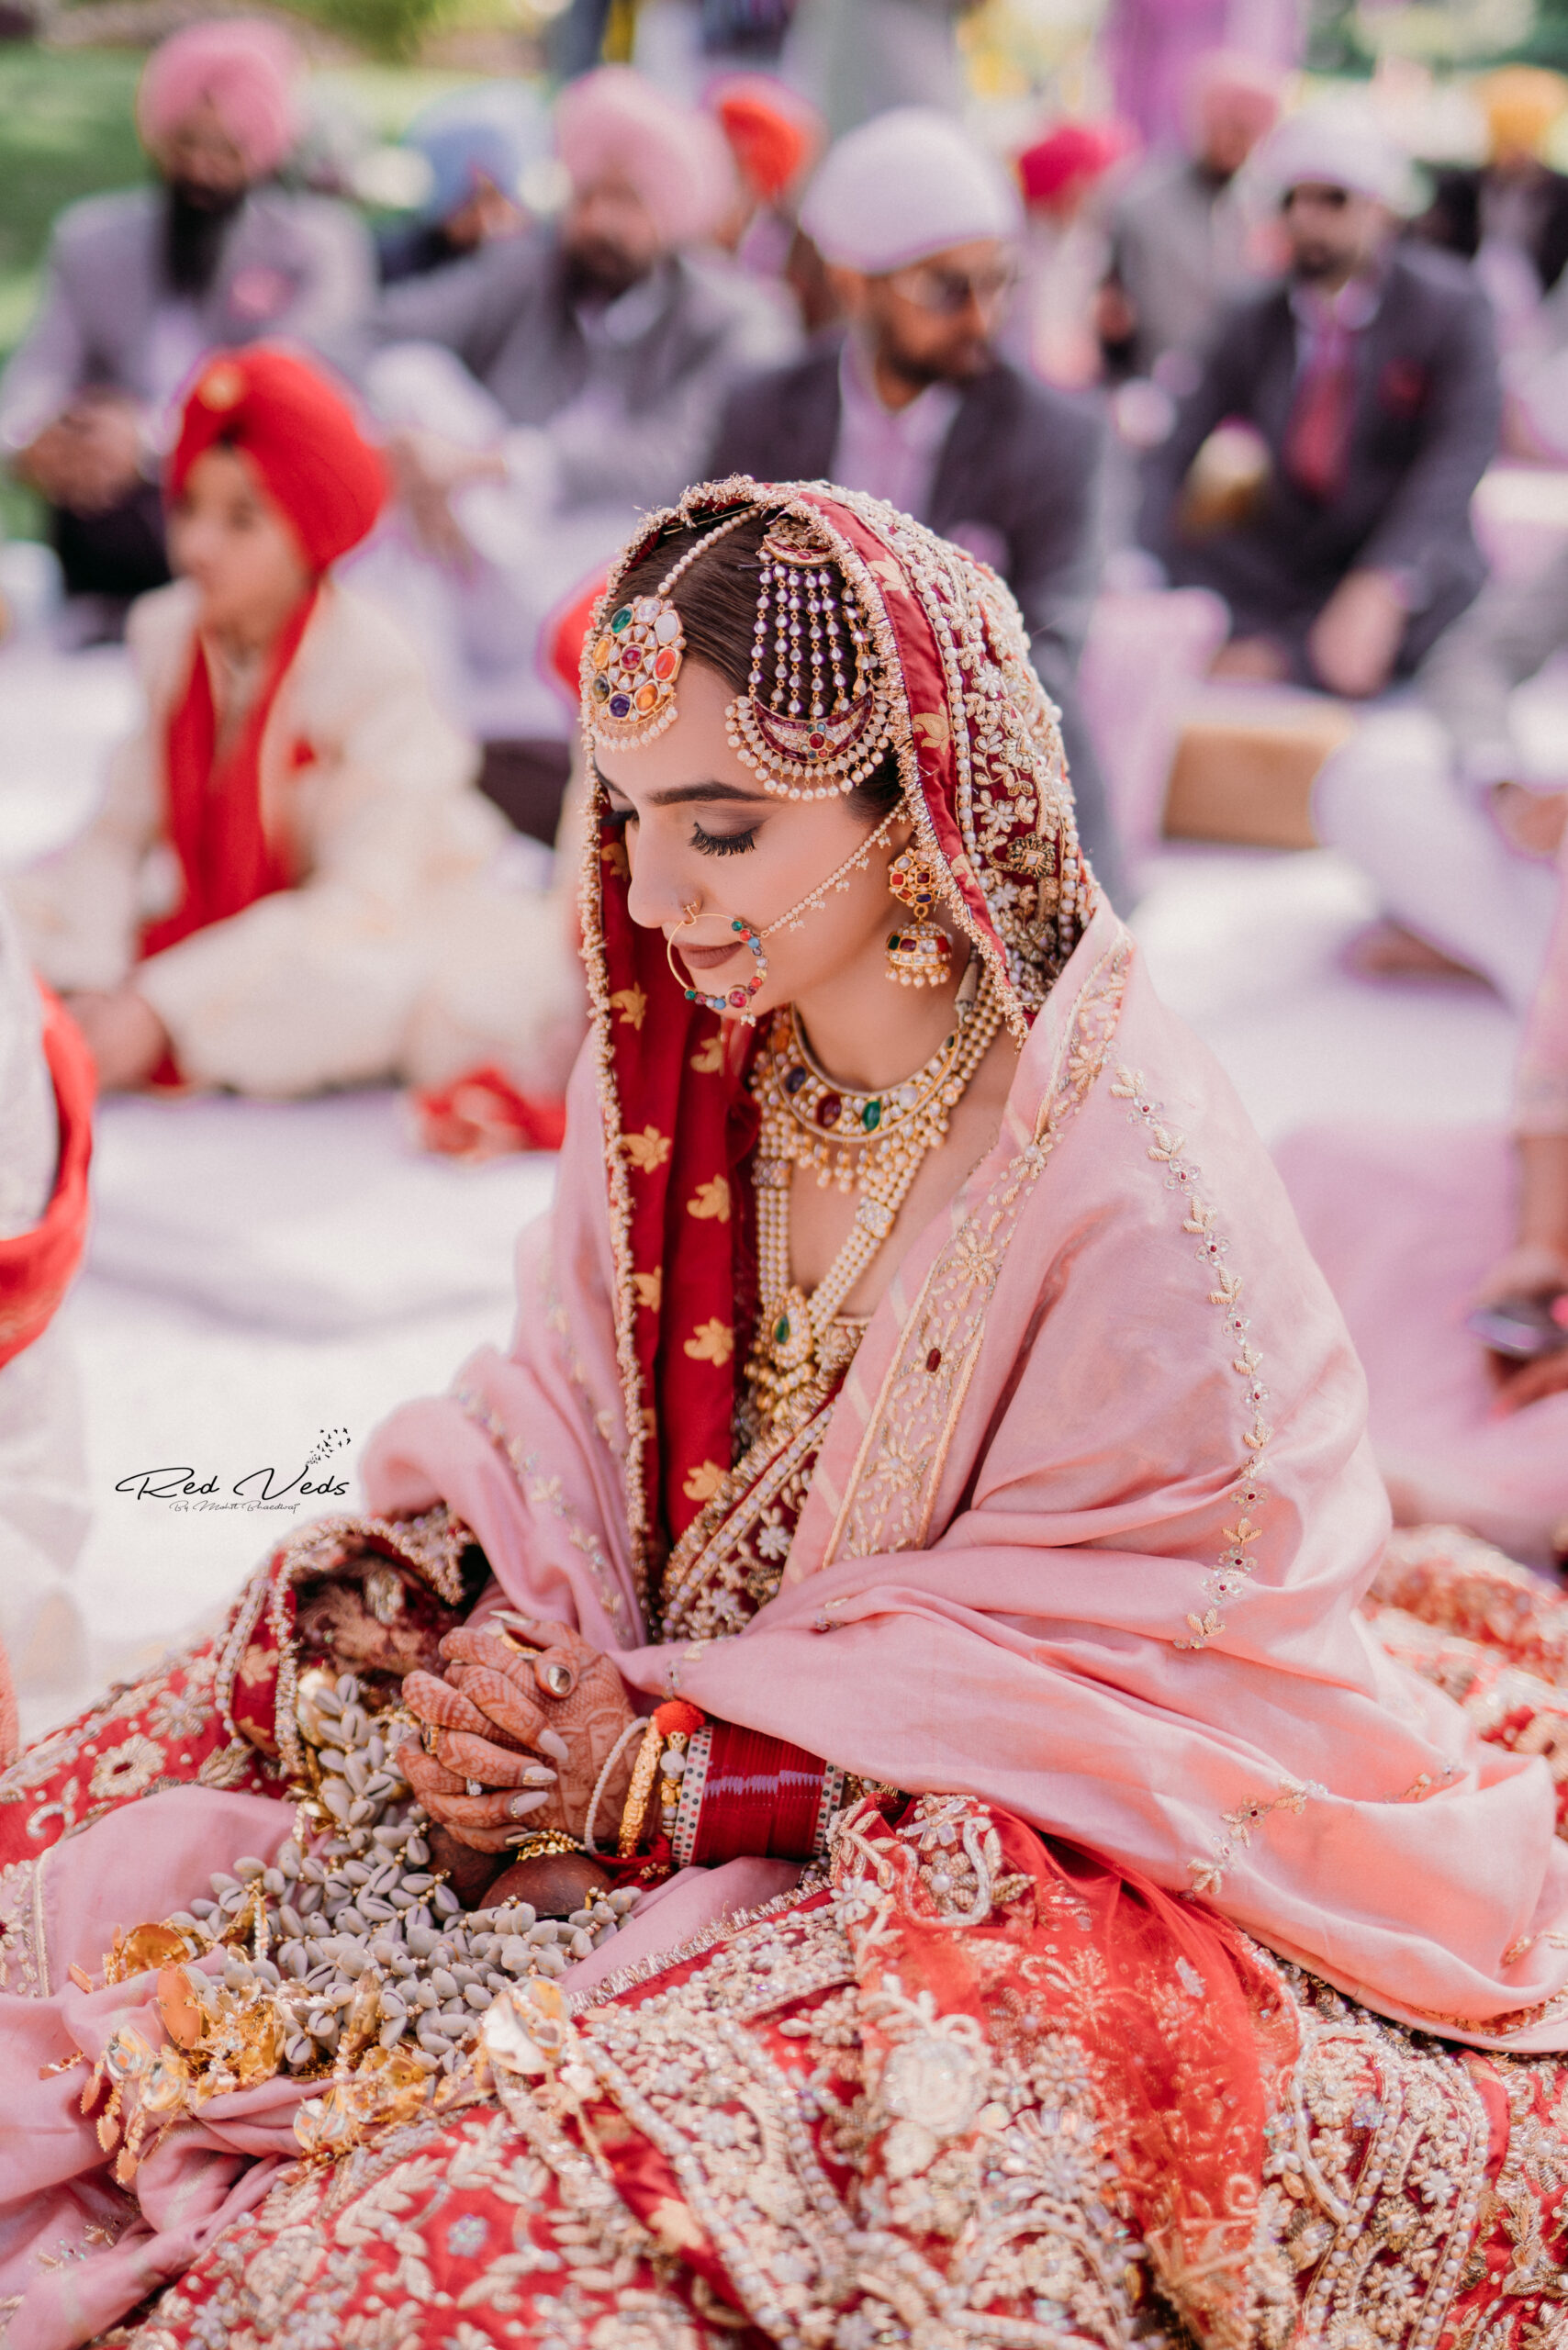 Shopzters | How To Be Effortlessly Beautiful With A Single Piece of Heavy  Jewellery! | Indian wedding photography, Wedding couple poses photography, Indian  bridal